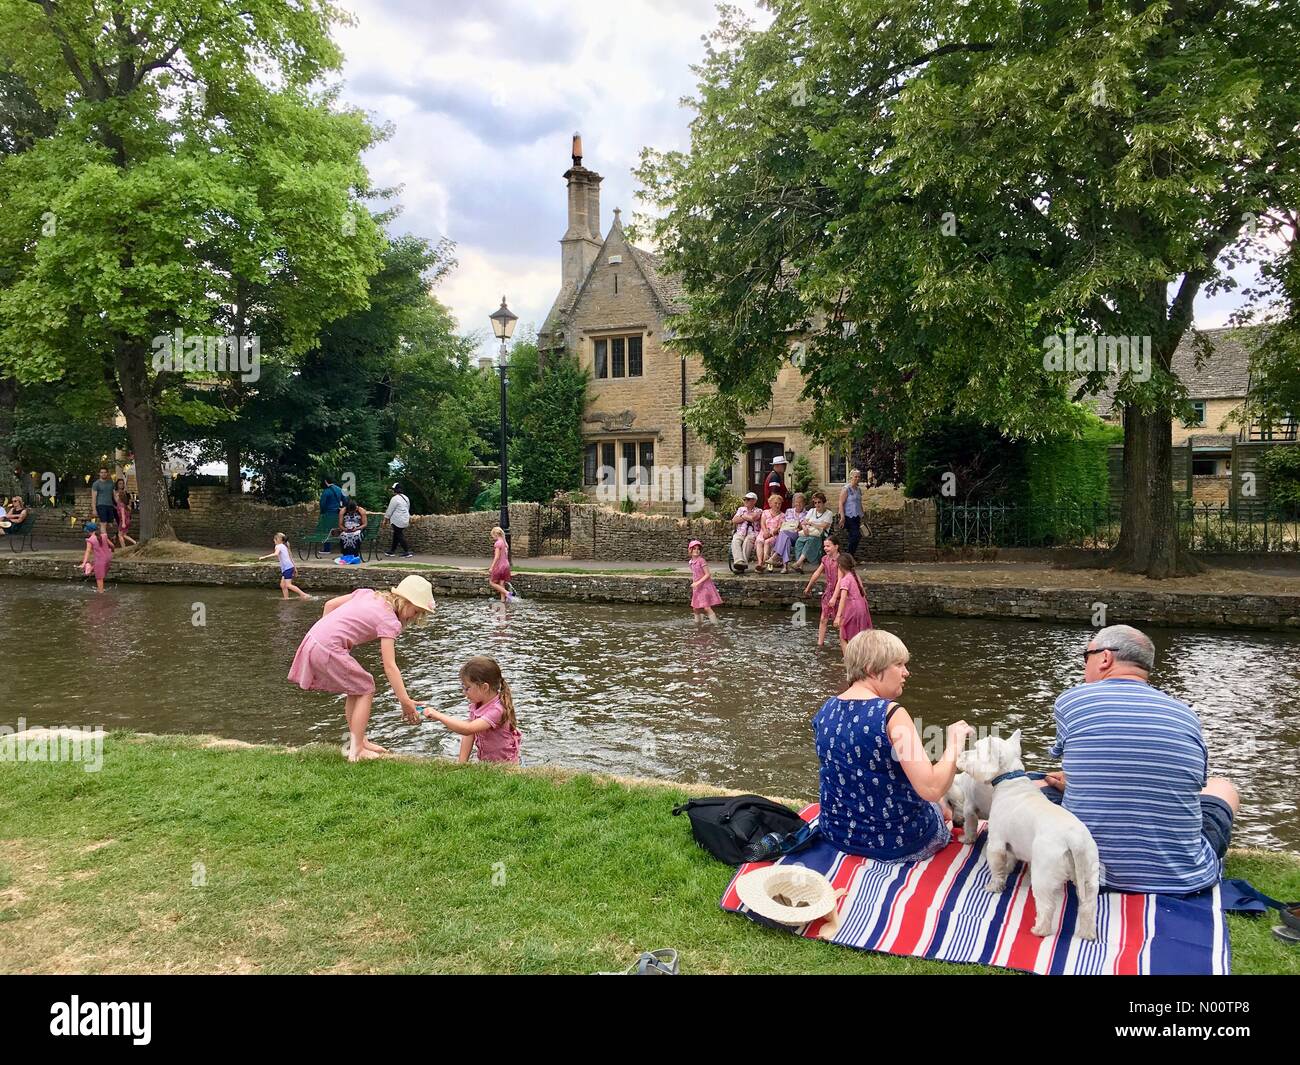 20 July 2018 Bourton-on-the-Water, England, UK Children cool off in the water as temperatures reach 26 C in the Cotswolds. Credit: Lisa Werner/StockimoNews/Alamy Live News Stock Photo